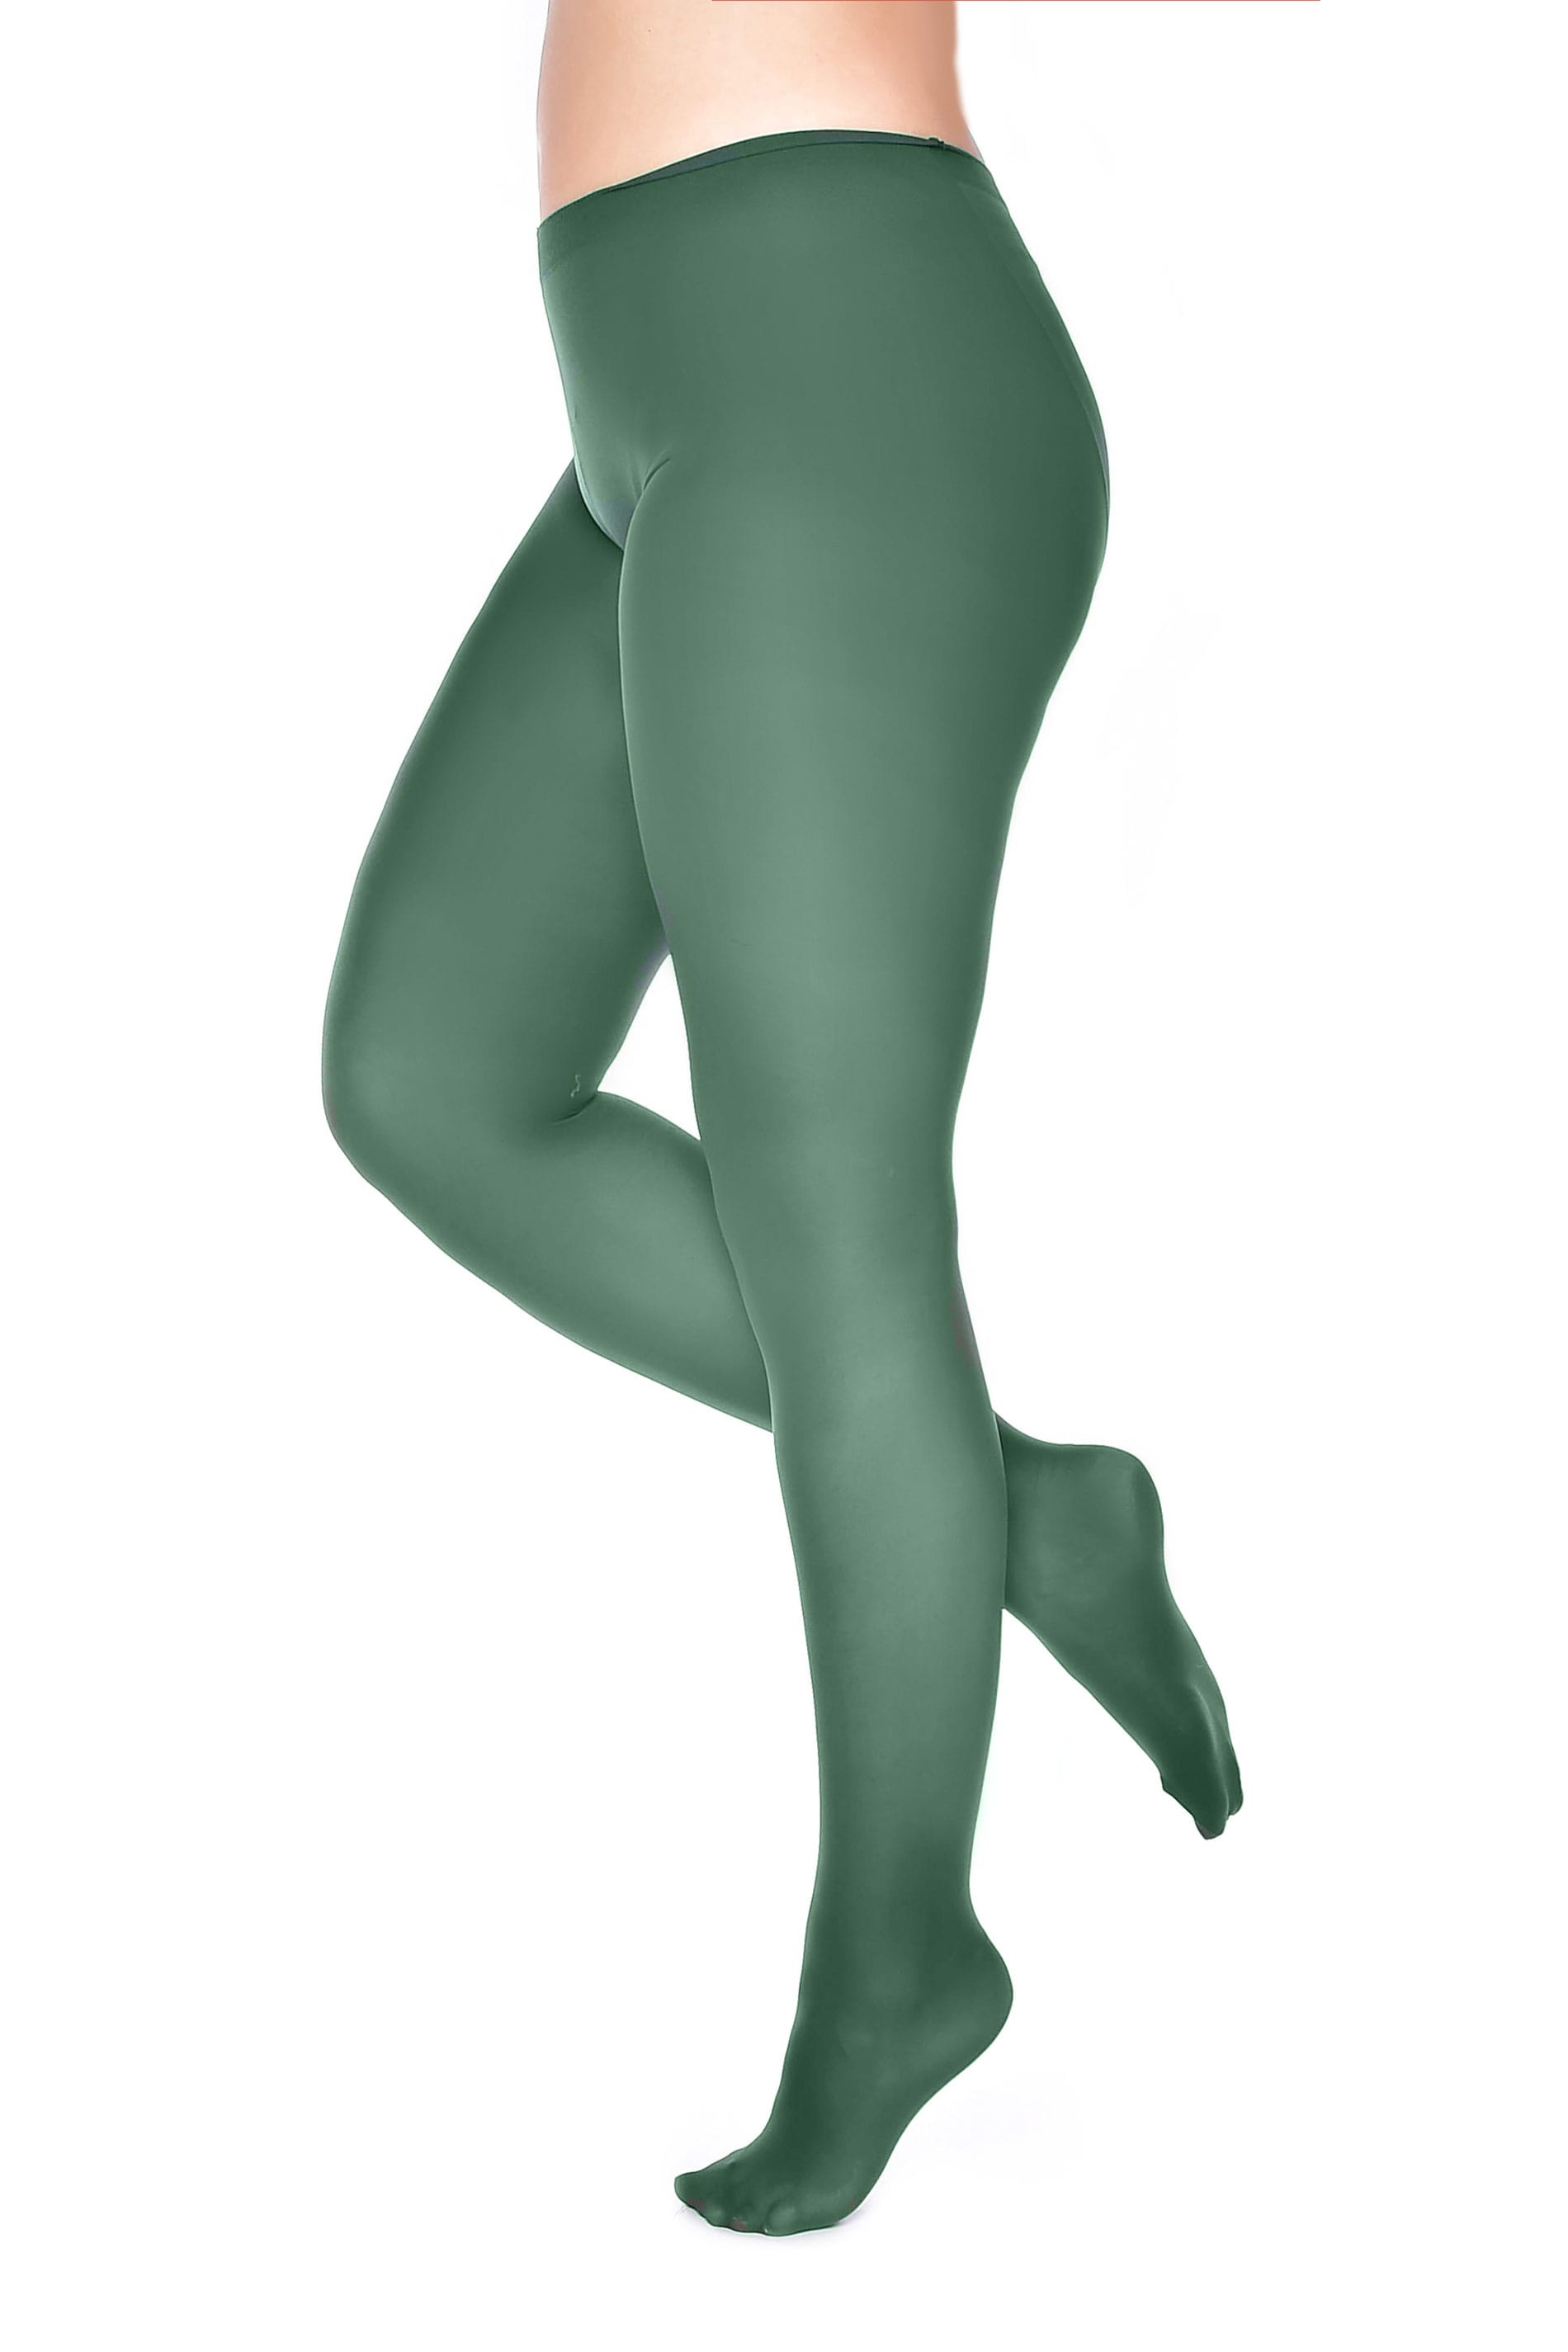 50 Denier Opaque Tights: Emerald Green / One Size – Doll Factory by Damzels